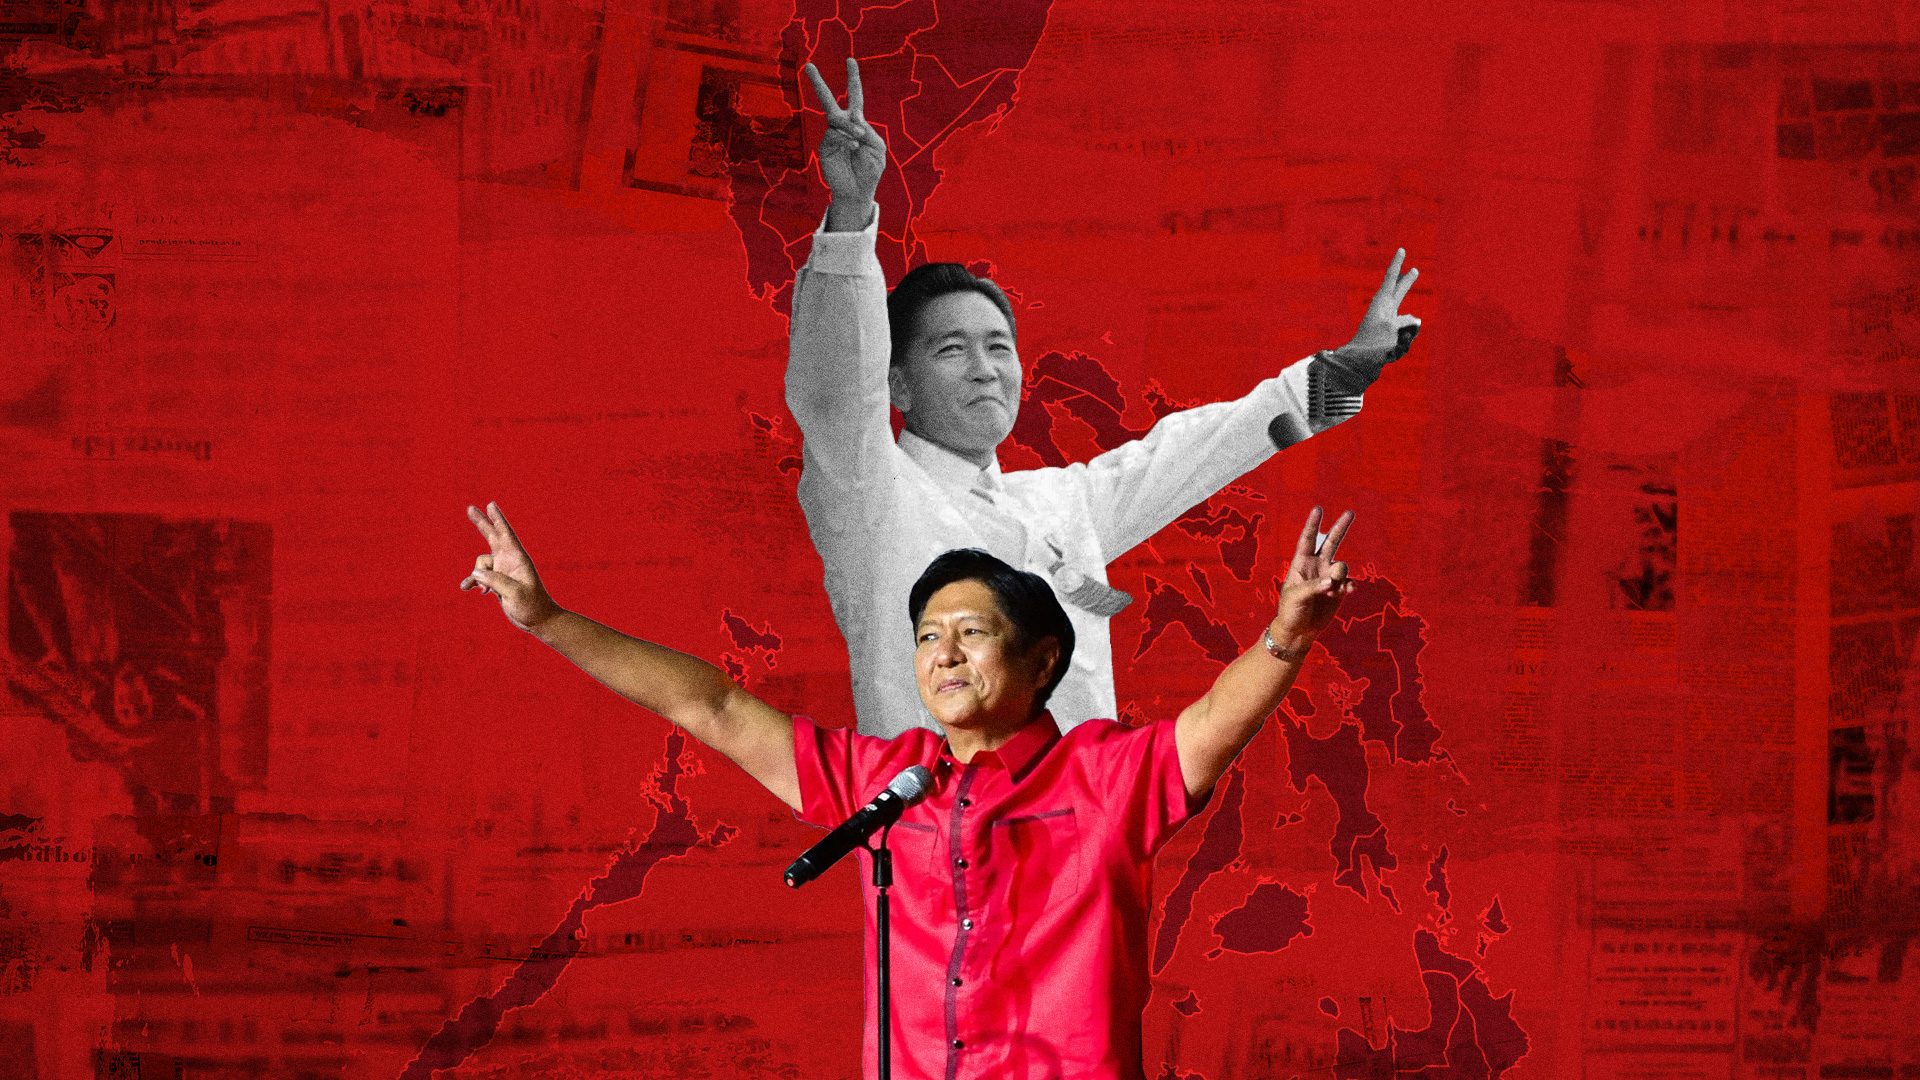 [Newspoint] From Marcos to Marcos